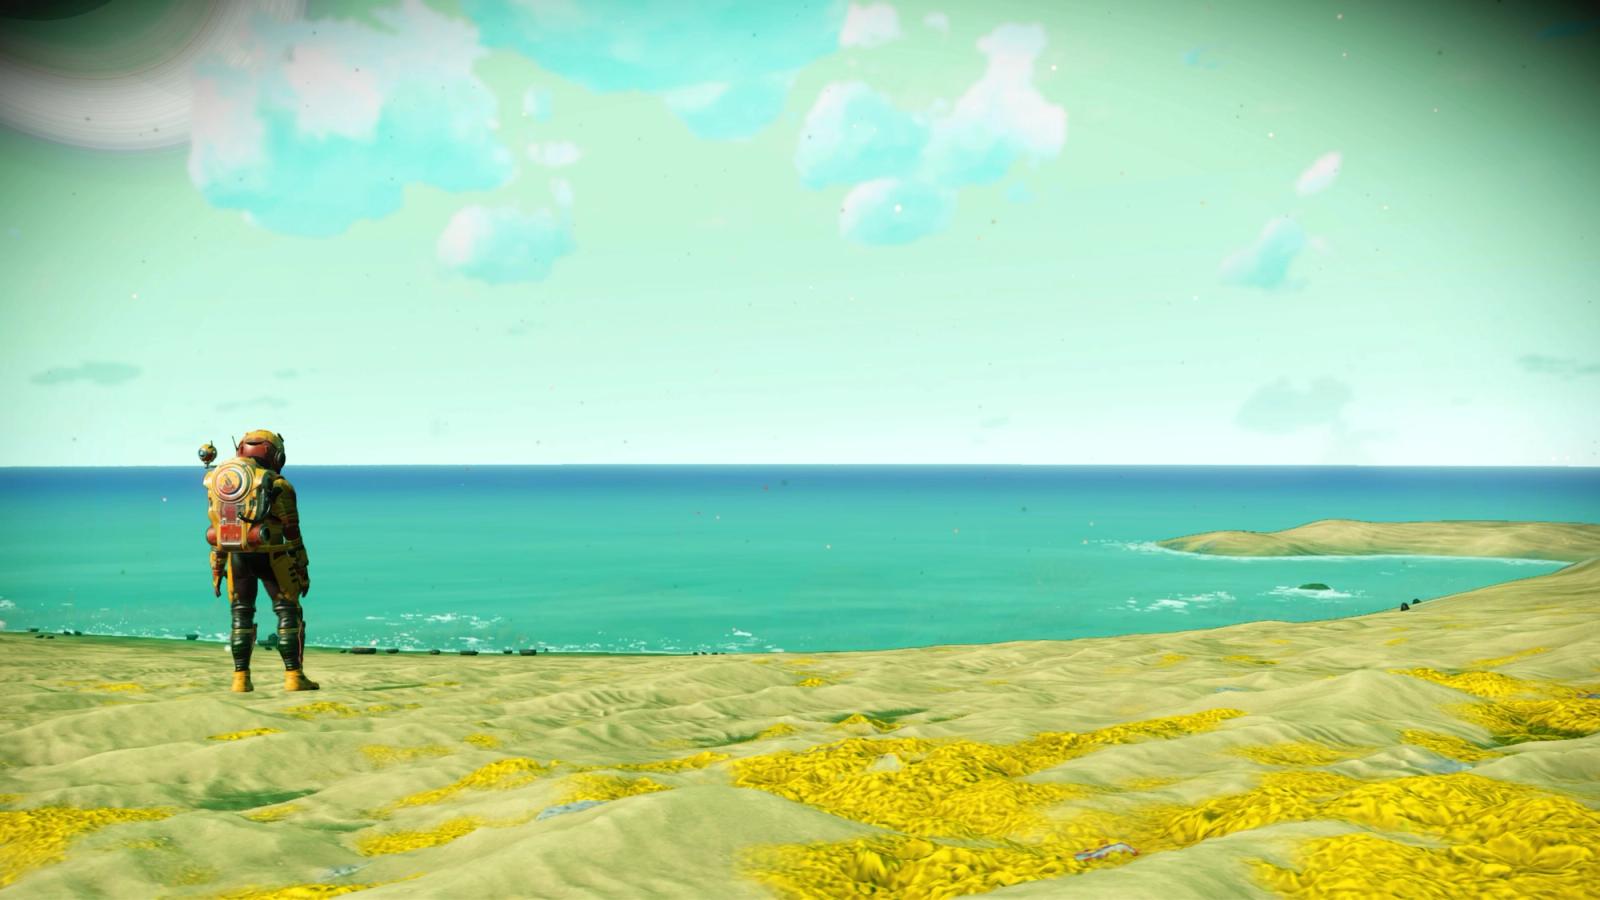 A screenshot from No Man's Sky featuring a character in a space suit, standing on a beach, and overlooking the water.